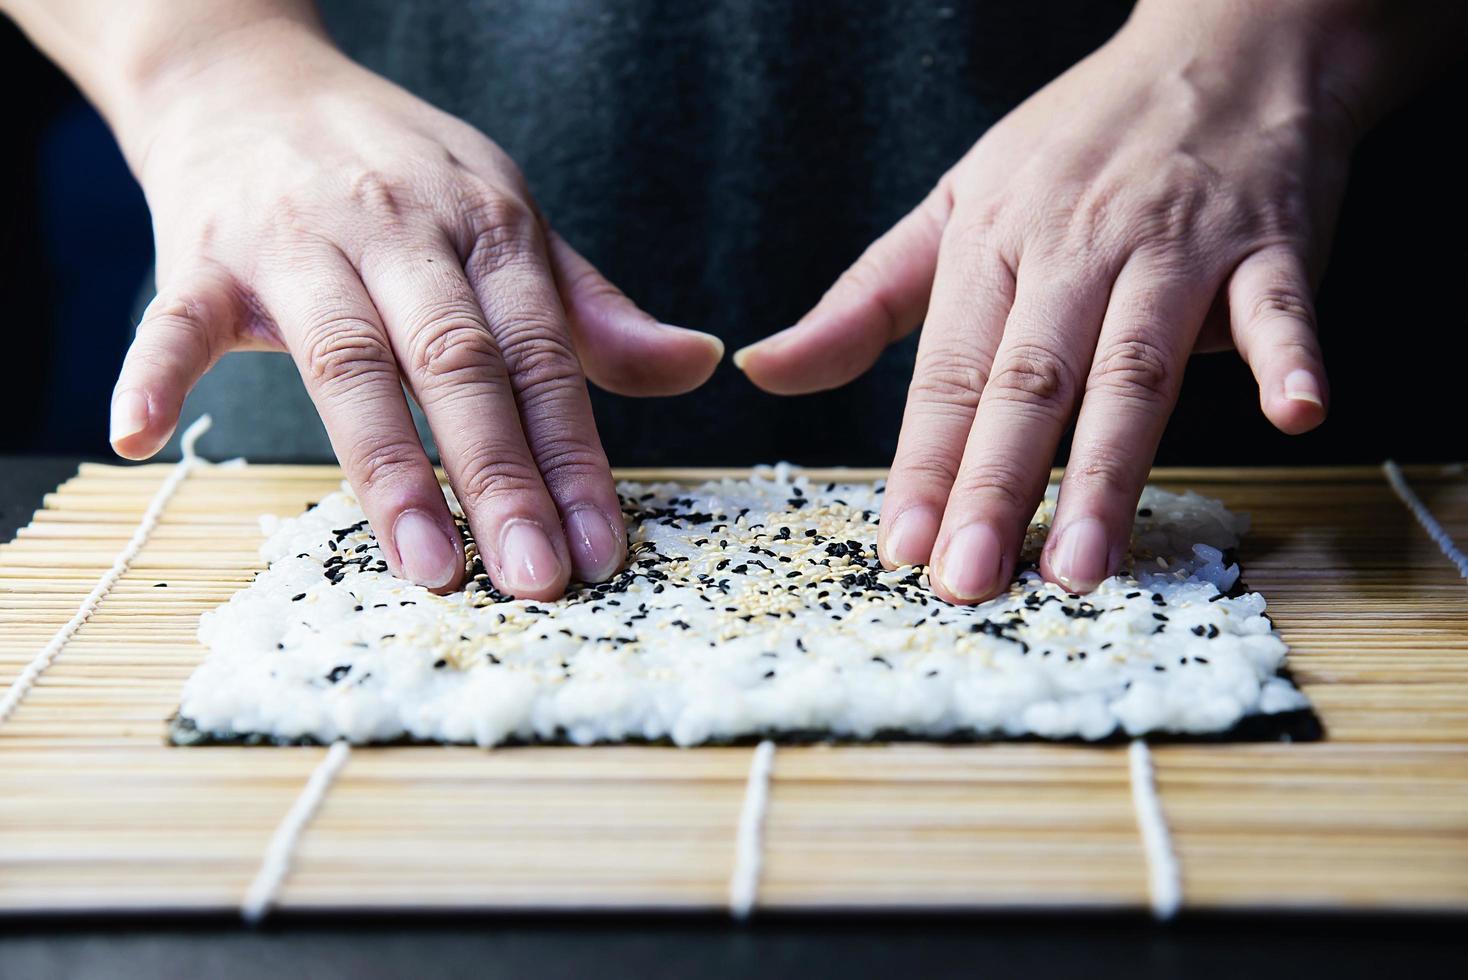 Chef preparing sushi roll over black table background - people with favorite dish Japanese food concept photo